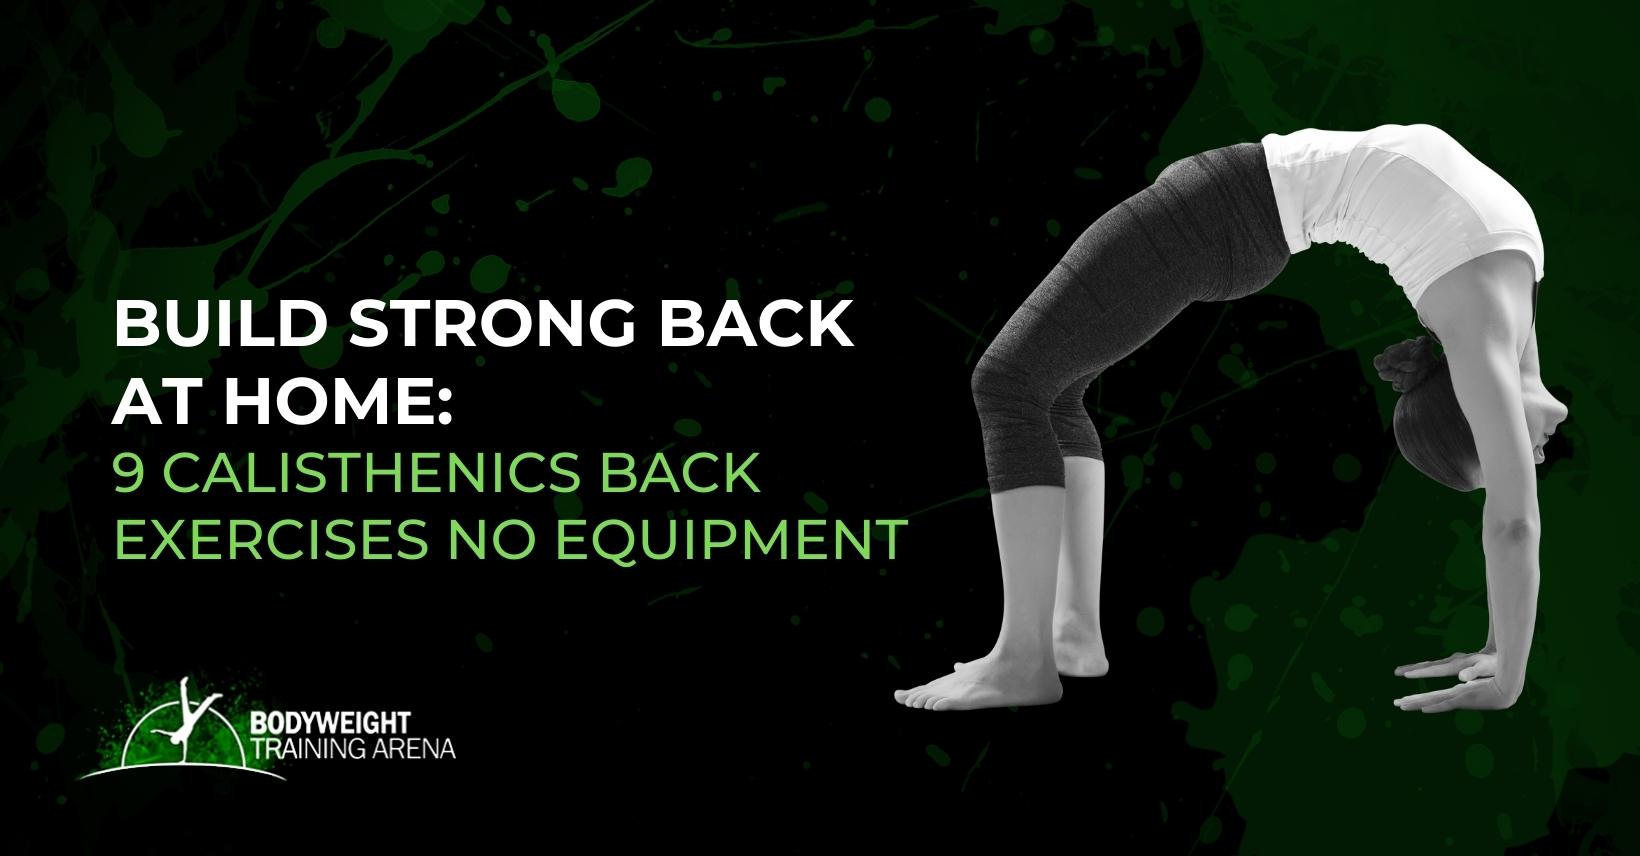 Build Strong Back At Home: 9 Calisthenics Back Exercises No Equipment